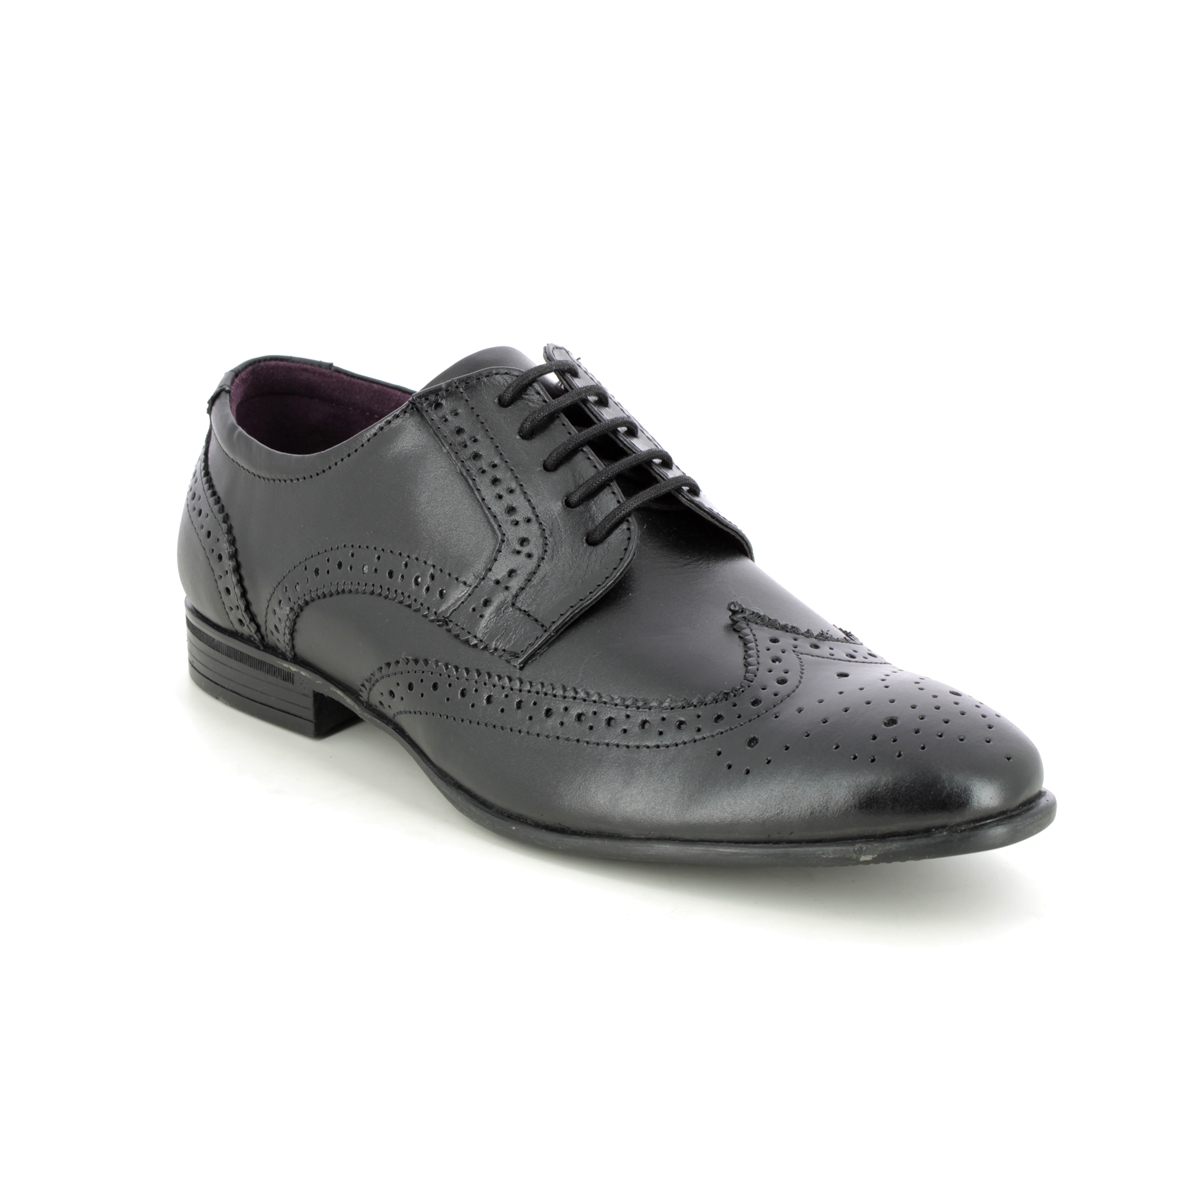 Lotus Easton Black leather Mens Brogues in a Plain Leather in Size 9